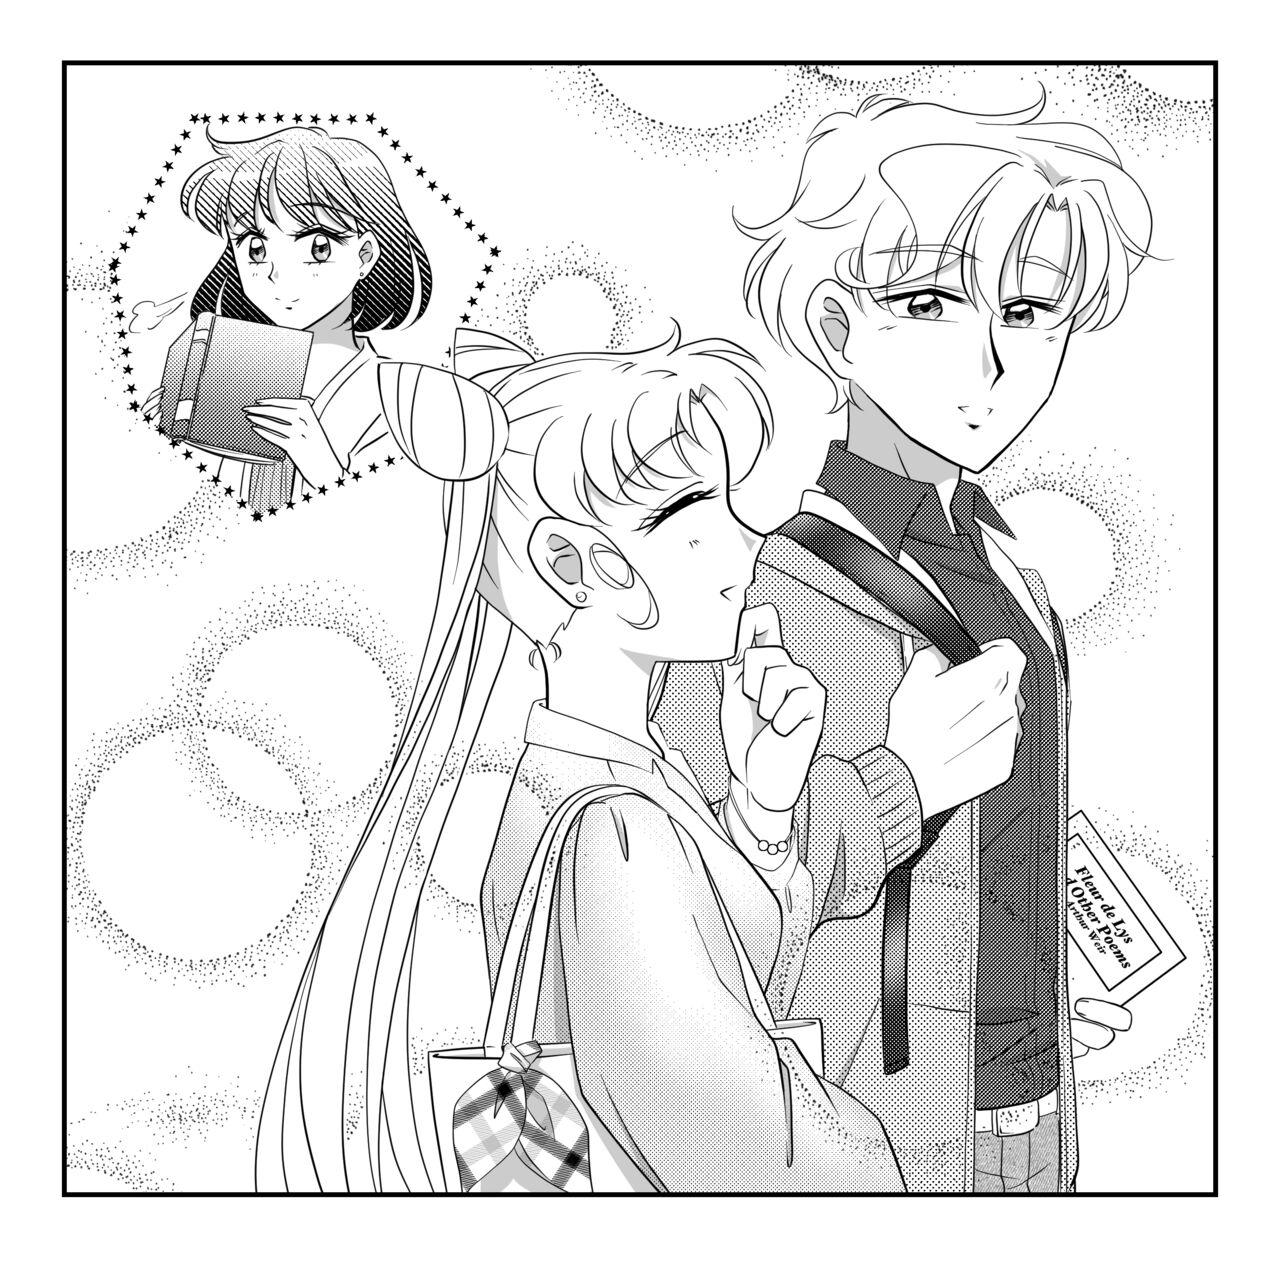 Blowjobs (Night of Gales Night of Gales][my new rebort is my boss's daughter (Bishoujo Senshi Sailor Moon) - Sailor moon | bishoujo senshi sailor moon Voyeursex - Page 10